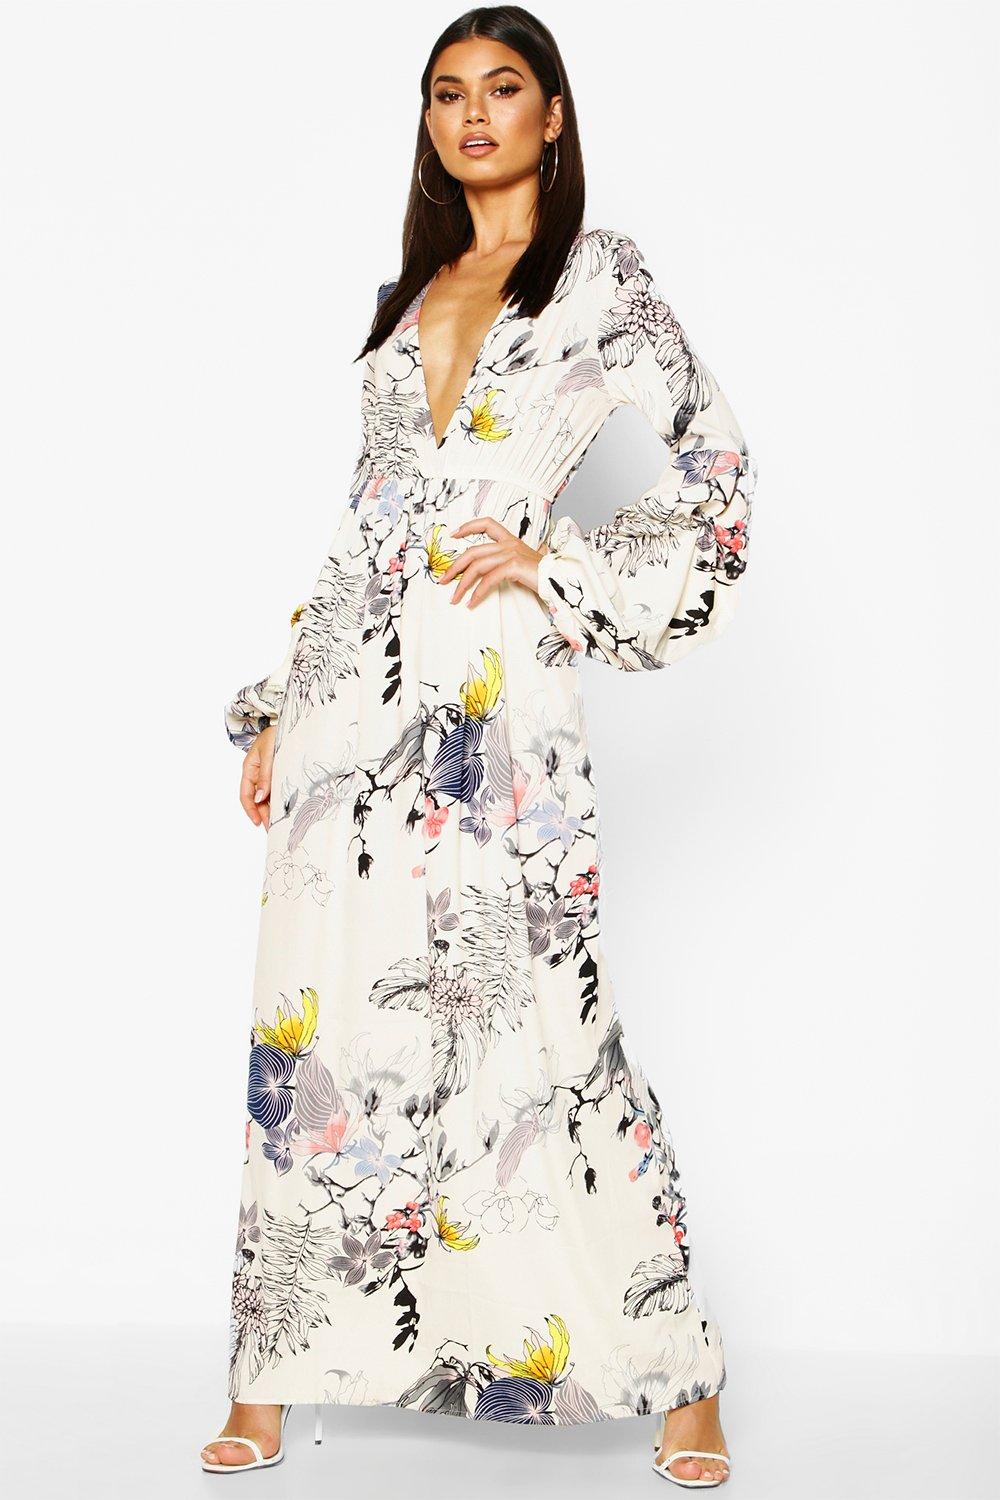 White Floral Dress With Sleeves Shop ...